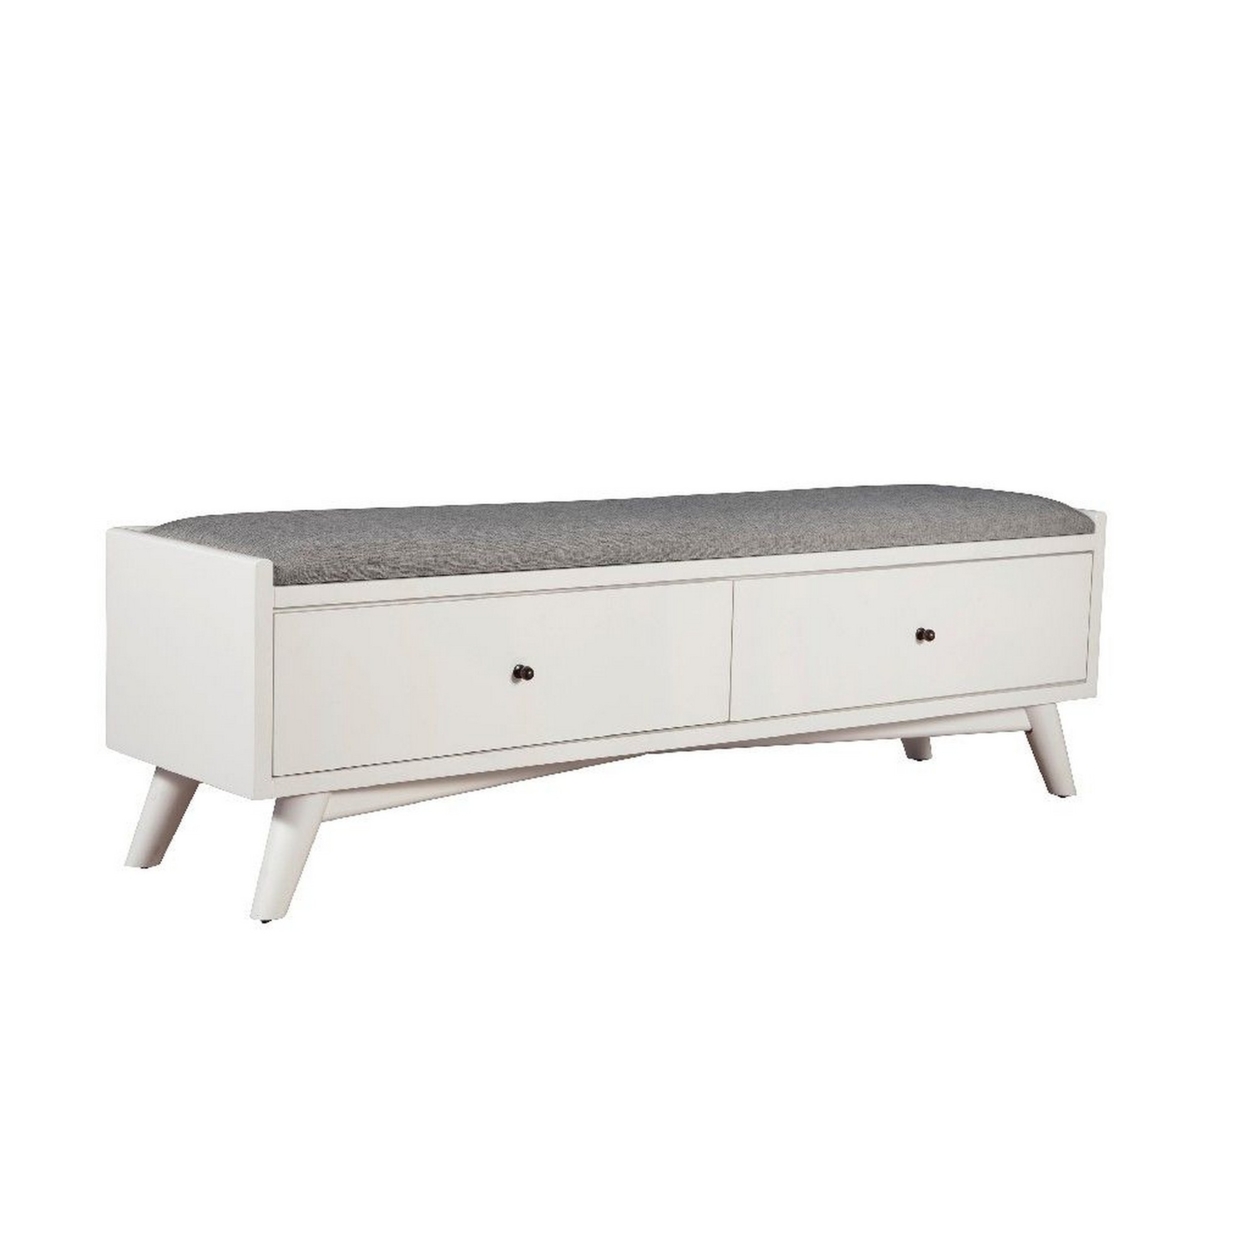 Fabric Upholstered Bedroom Bench With 2 Storage Drawers, Brown And Gray- Saltoro Sherpi